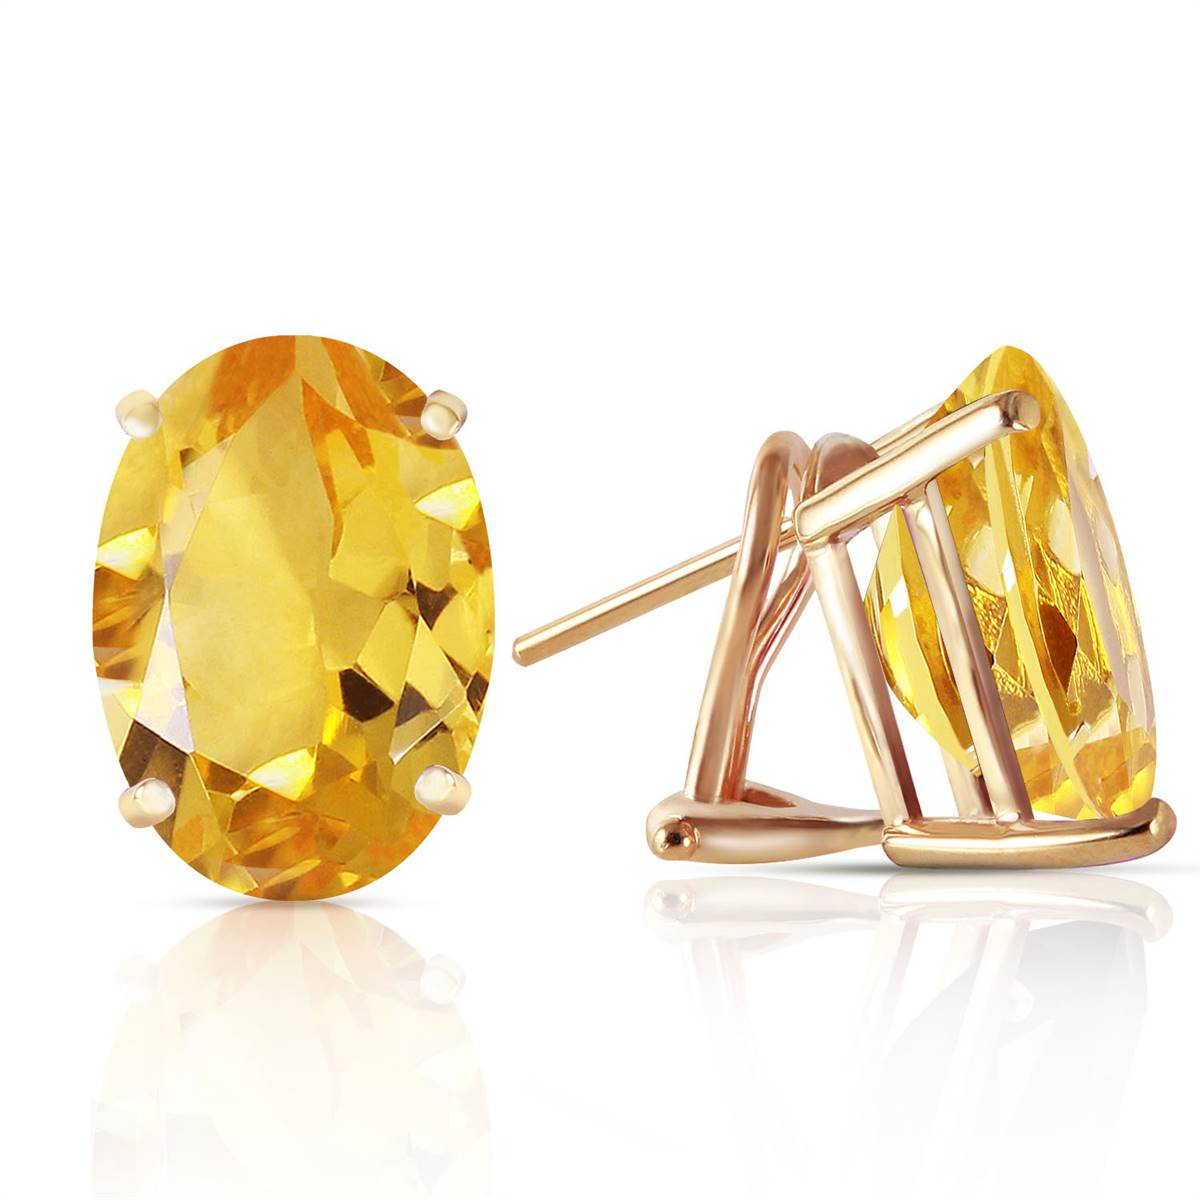 13 Carat 14K Solid Yellow Gold French Clips Earrings Natural Citrine